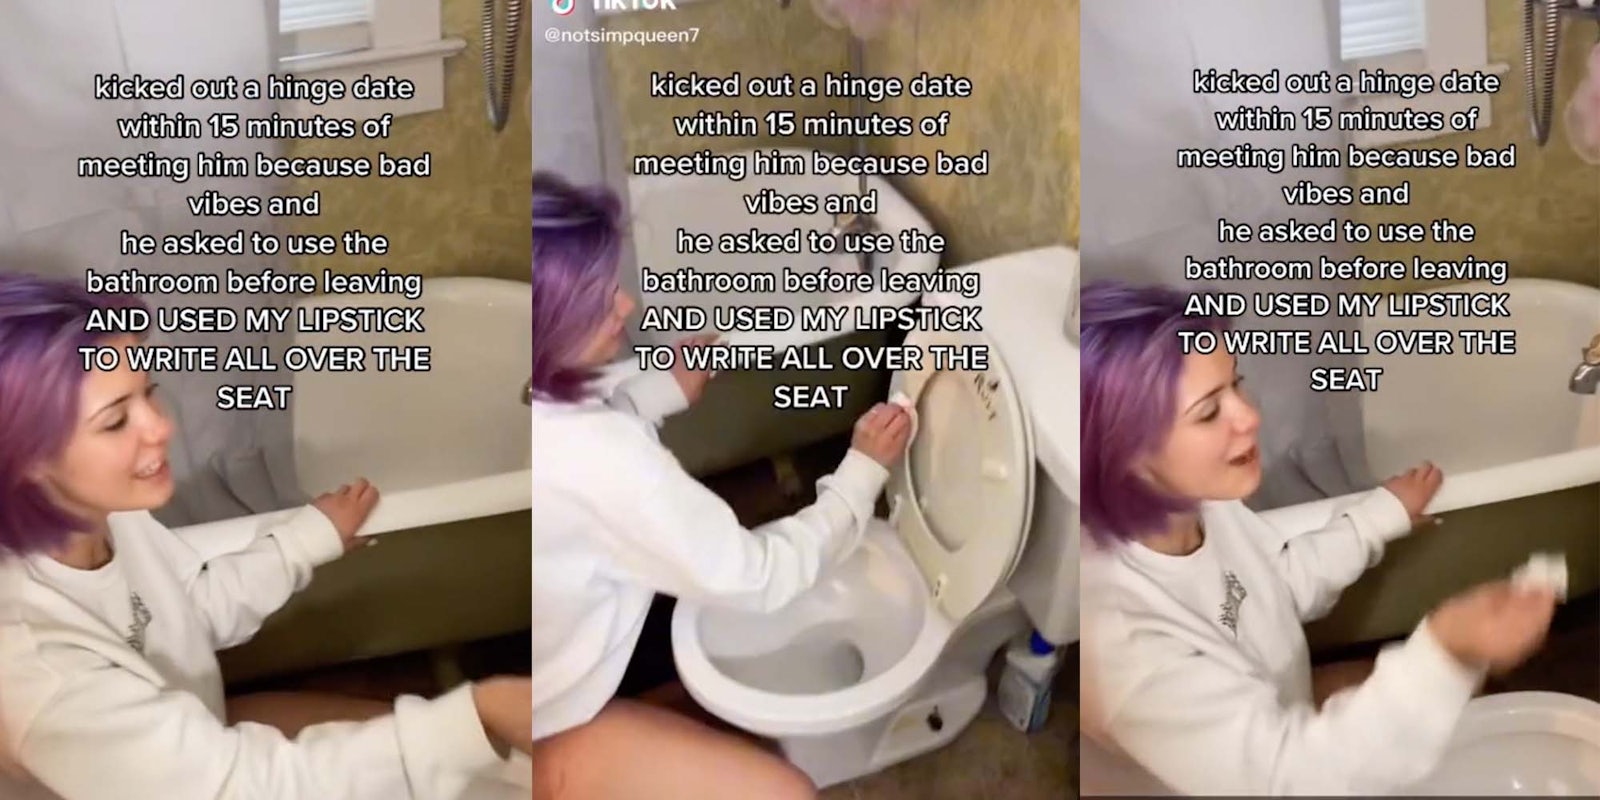 A TikToker's date wrote a message to other men she might date on her toilet using her lipstick.